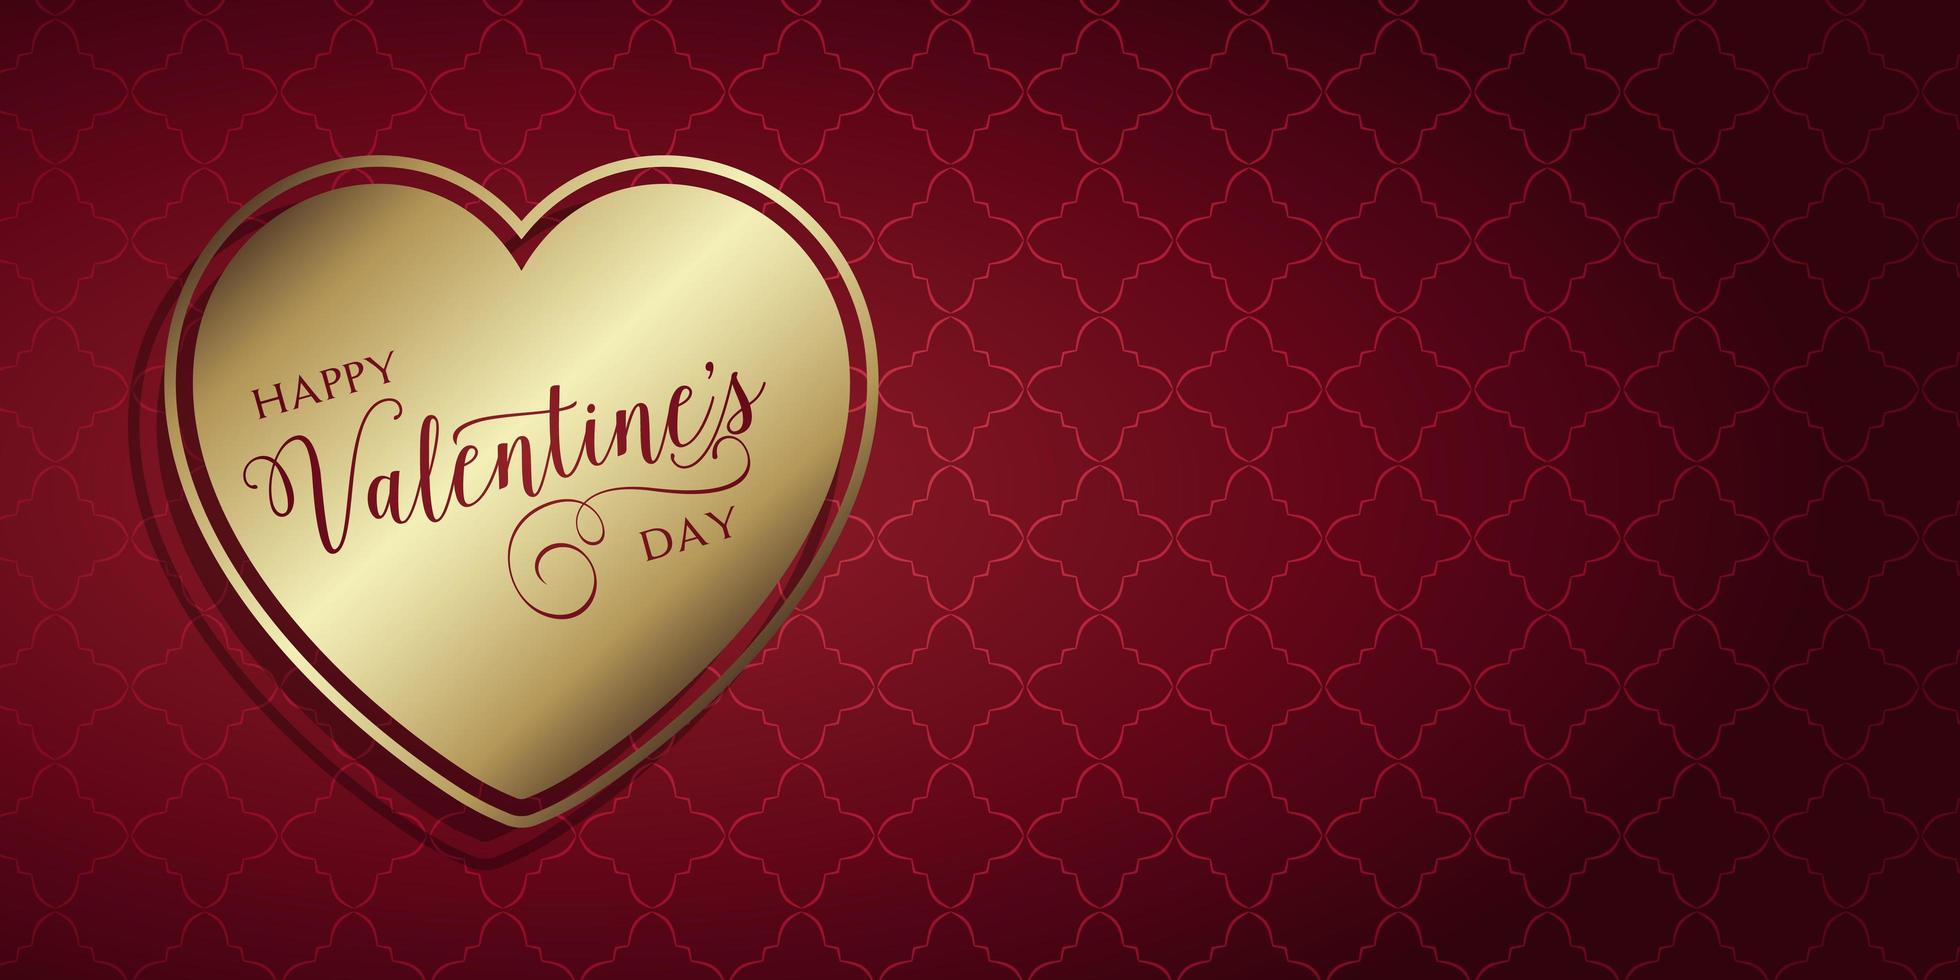 Valentines Day banner with gold heart vector